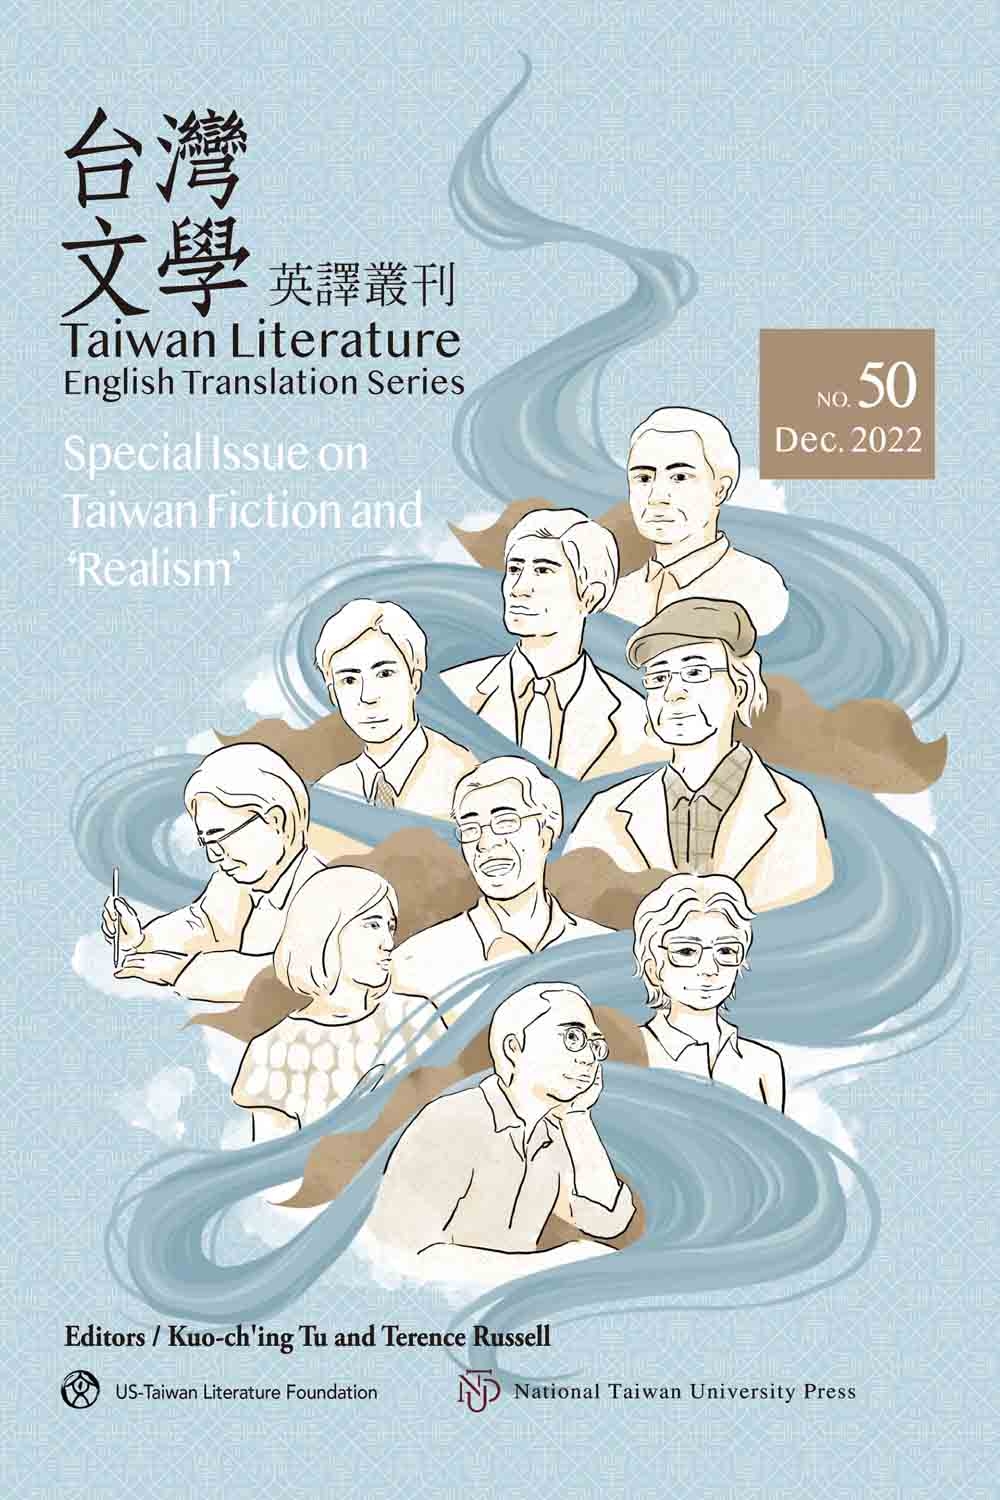 Special Issue on Taiwan Fiction and ‘Realism’(台灣文學英譯叢刊 no.50)